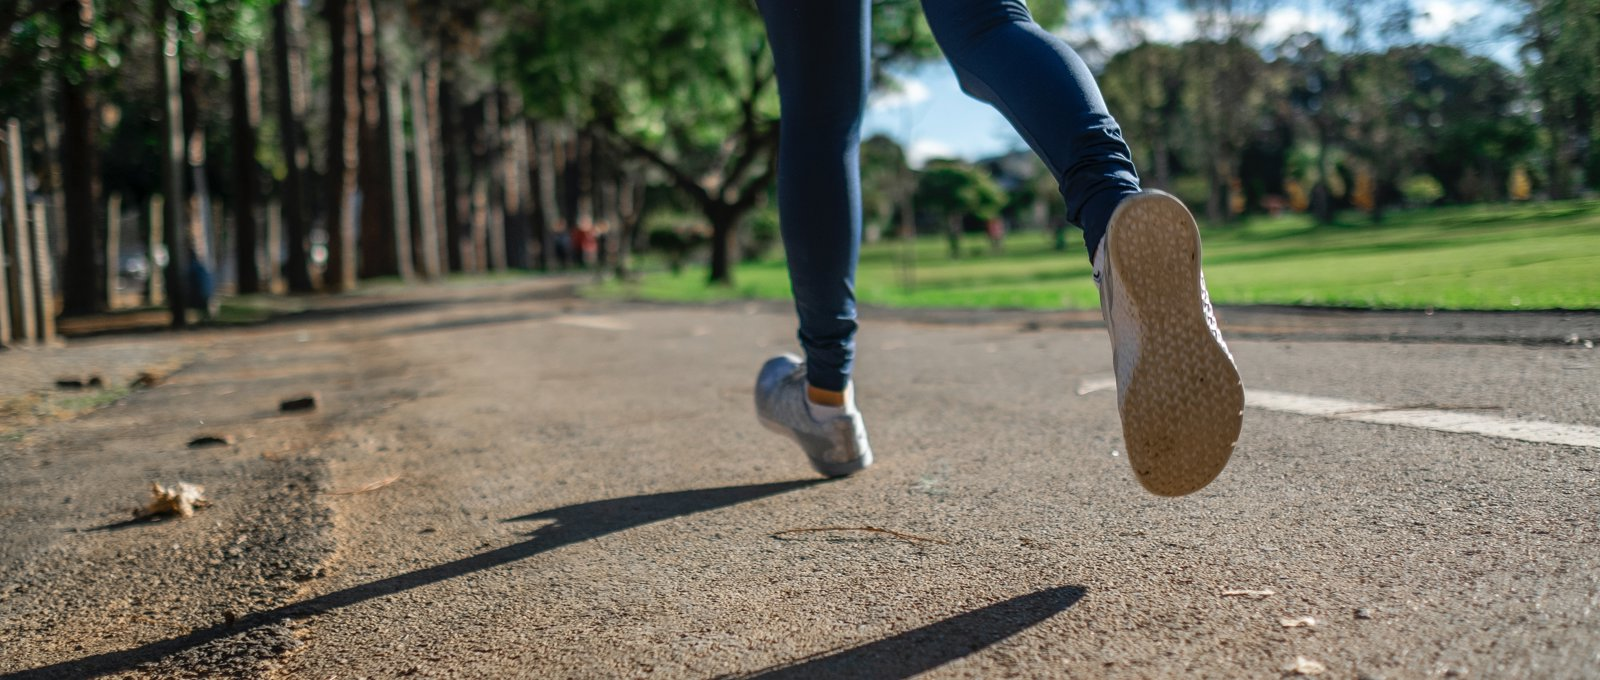 Close up photo of a woman's lower legs and feet taken as she jogs along a pathway in a park